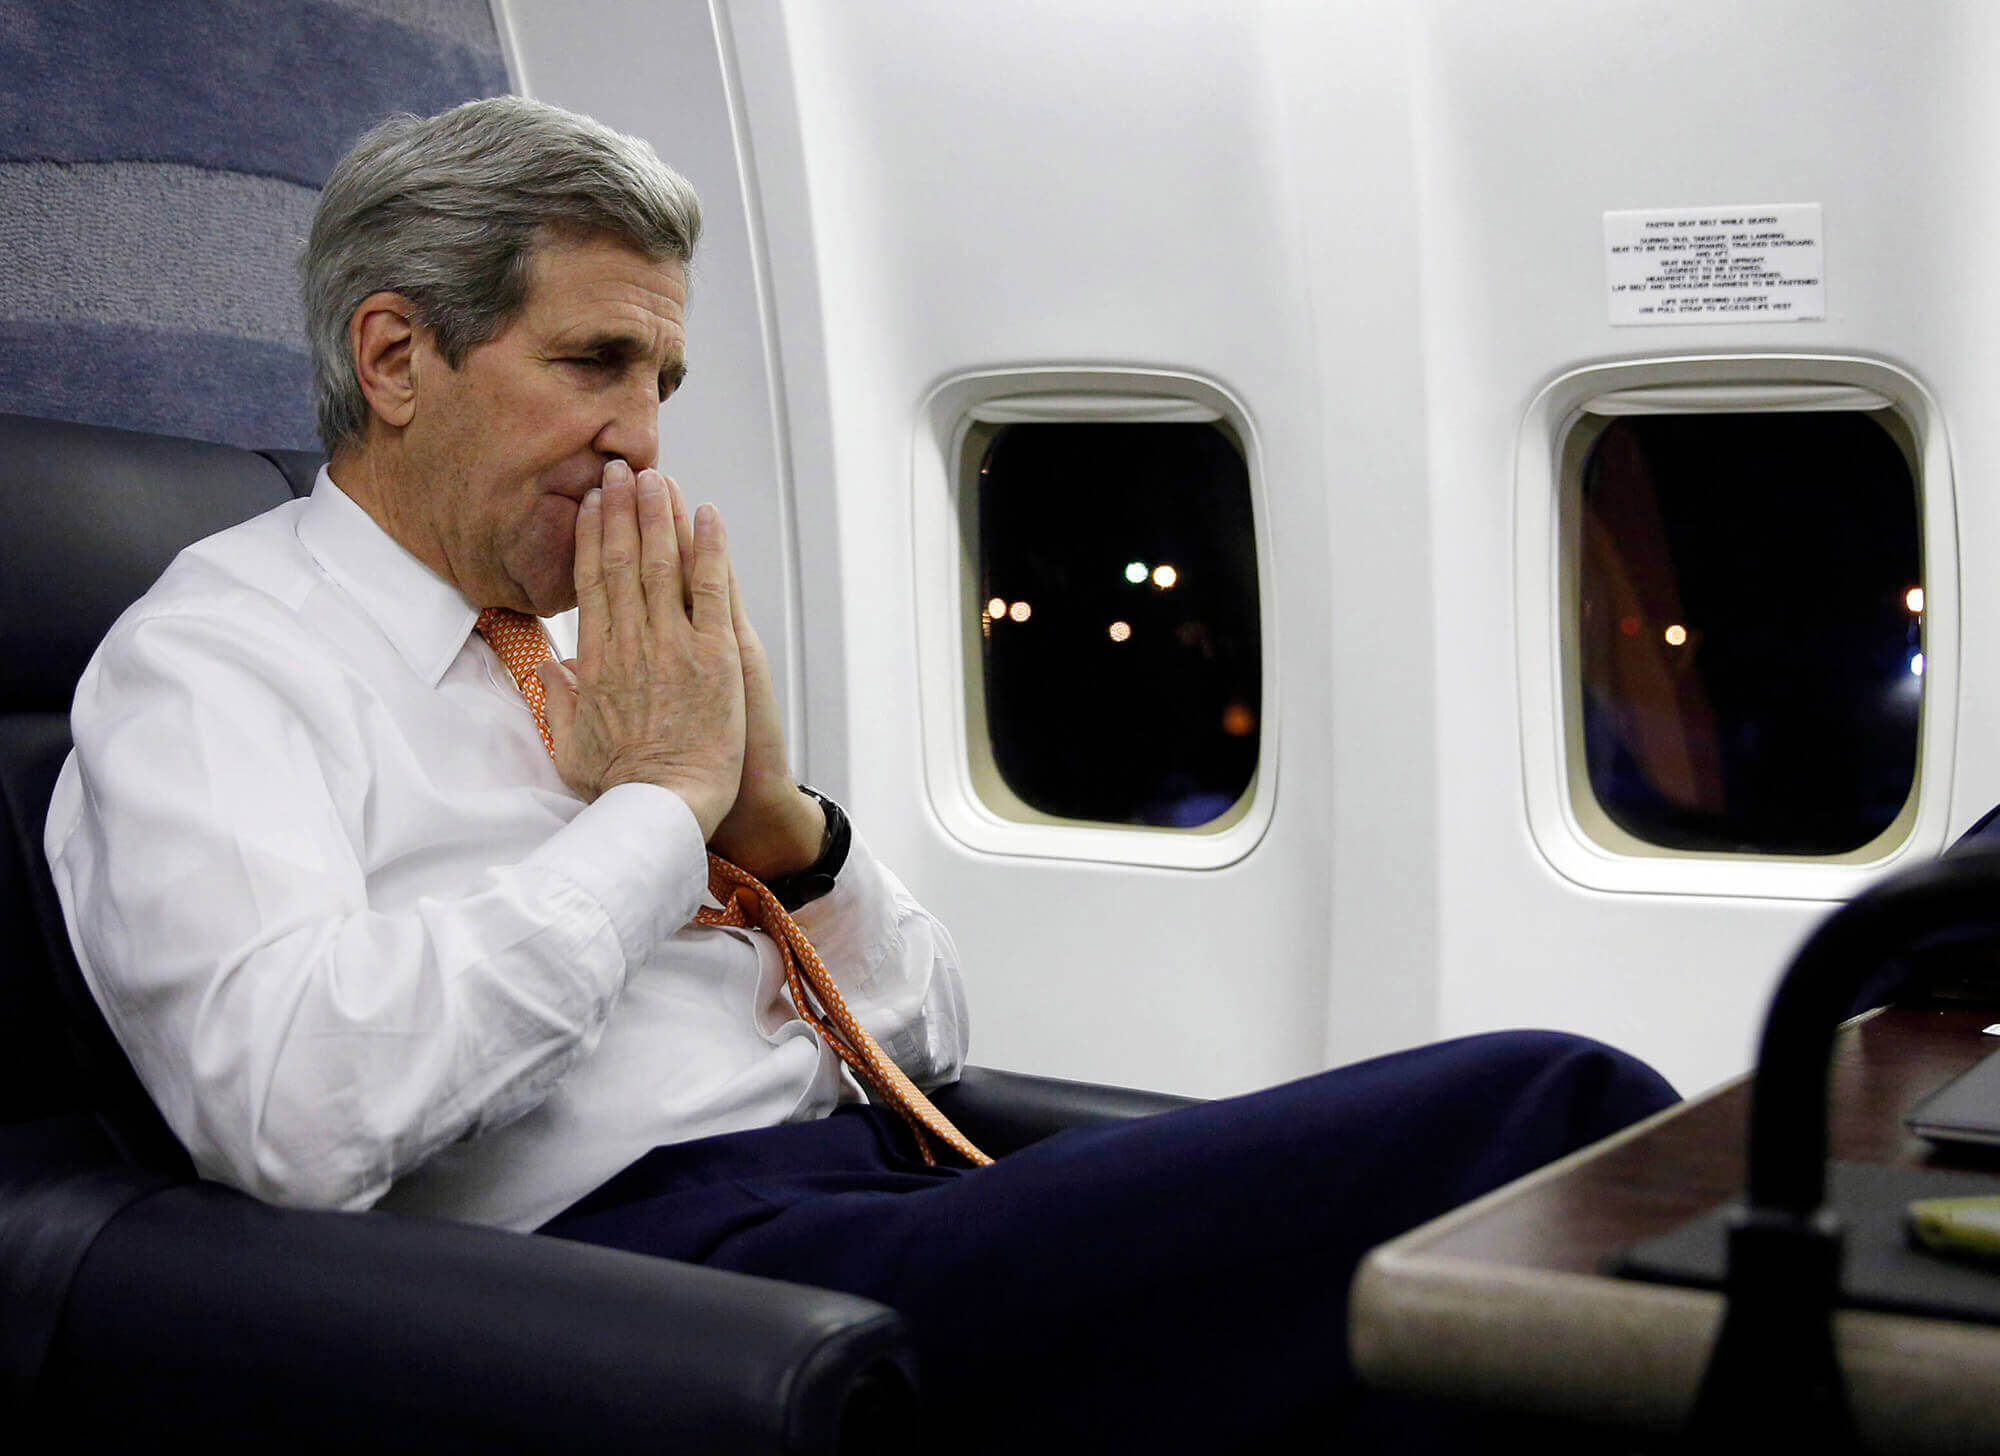 Image of John Kerry speaking to journalists in airplane